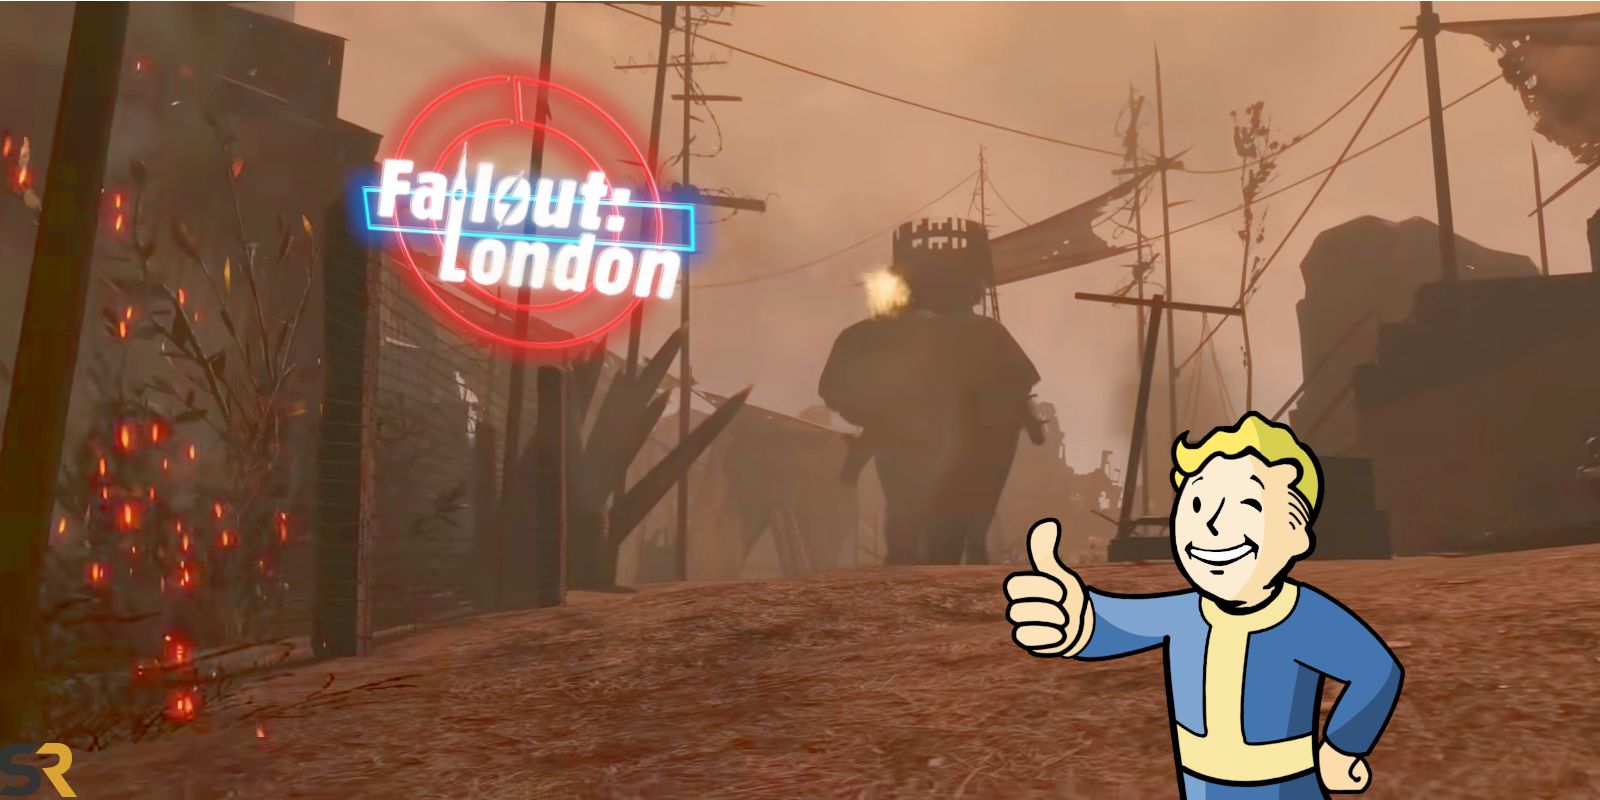 New Fallout London Trailer Fallout 4 Mod Features Elephants Vehicles